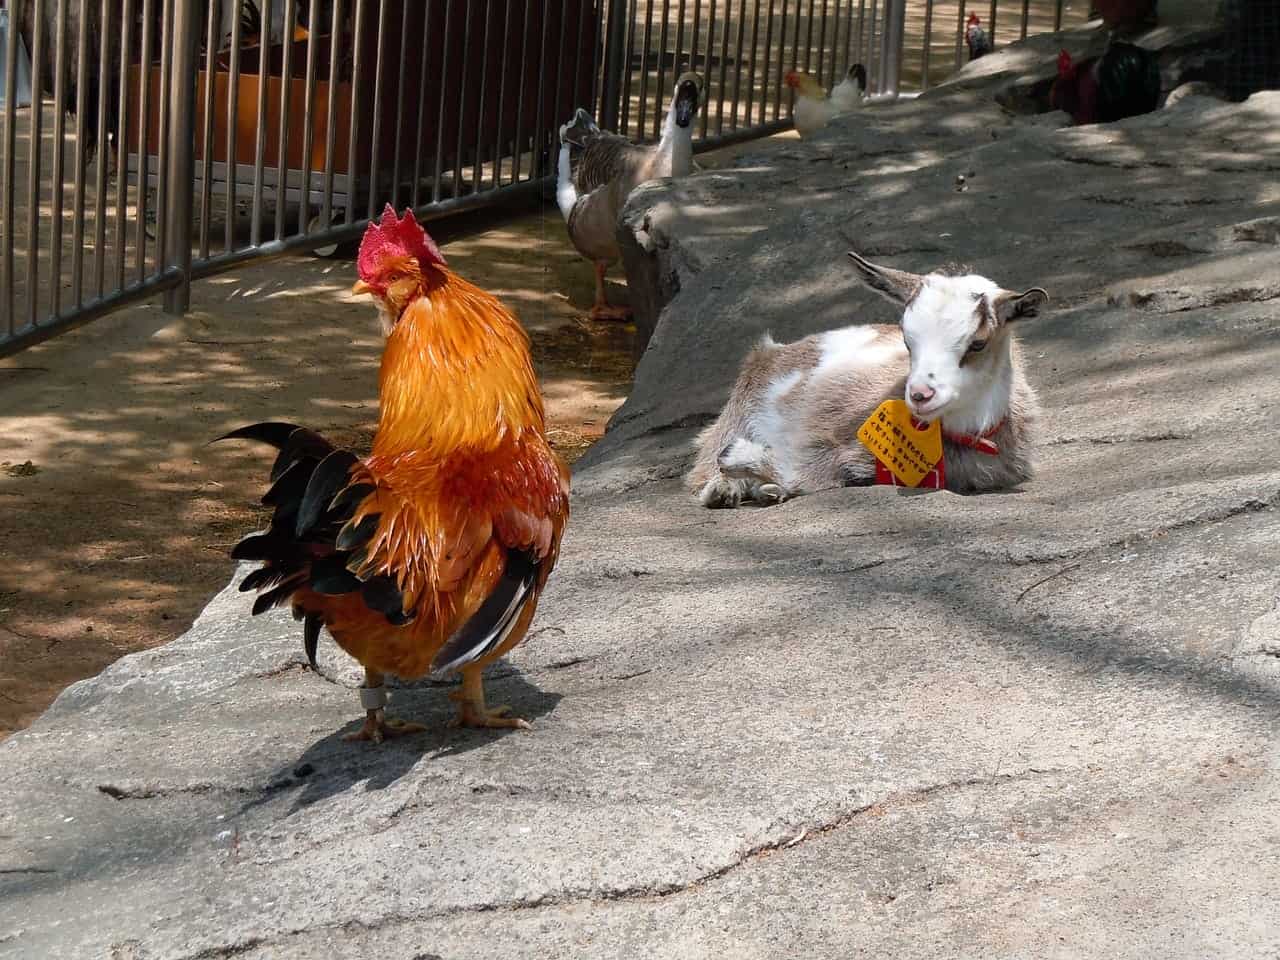 goat and chicken